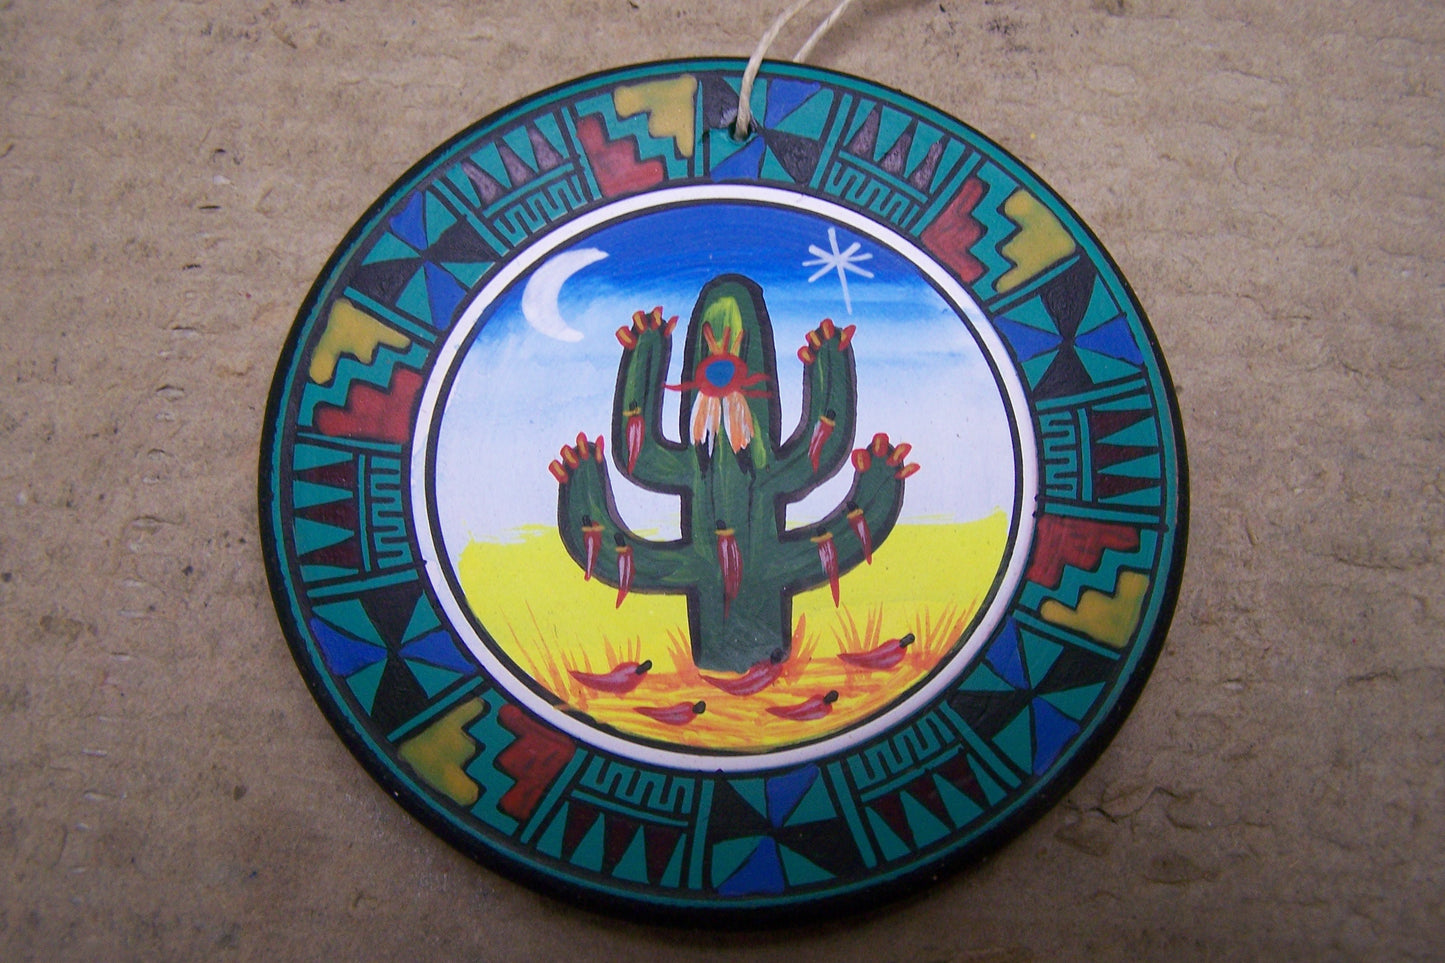 Painted Clay Plate Ornament - Saguaro Cactus #1